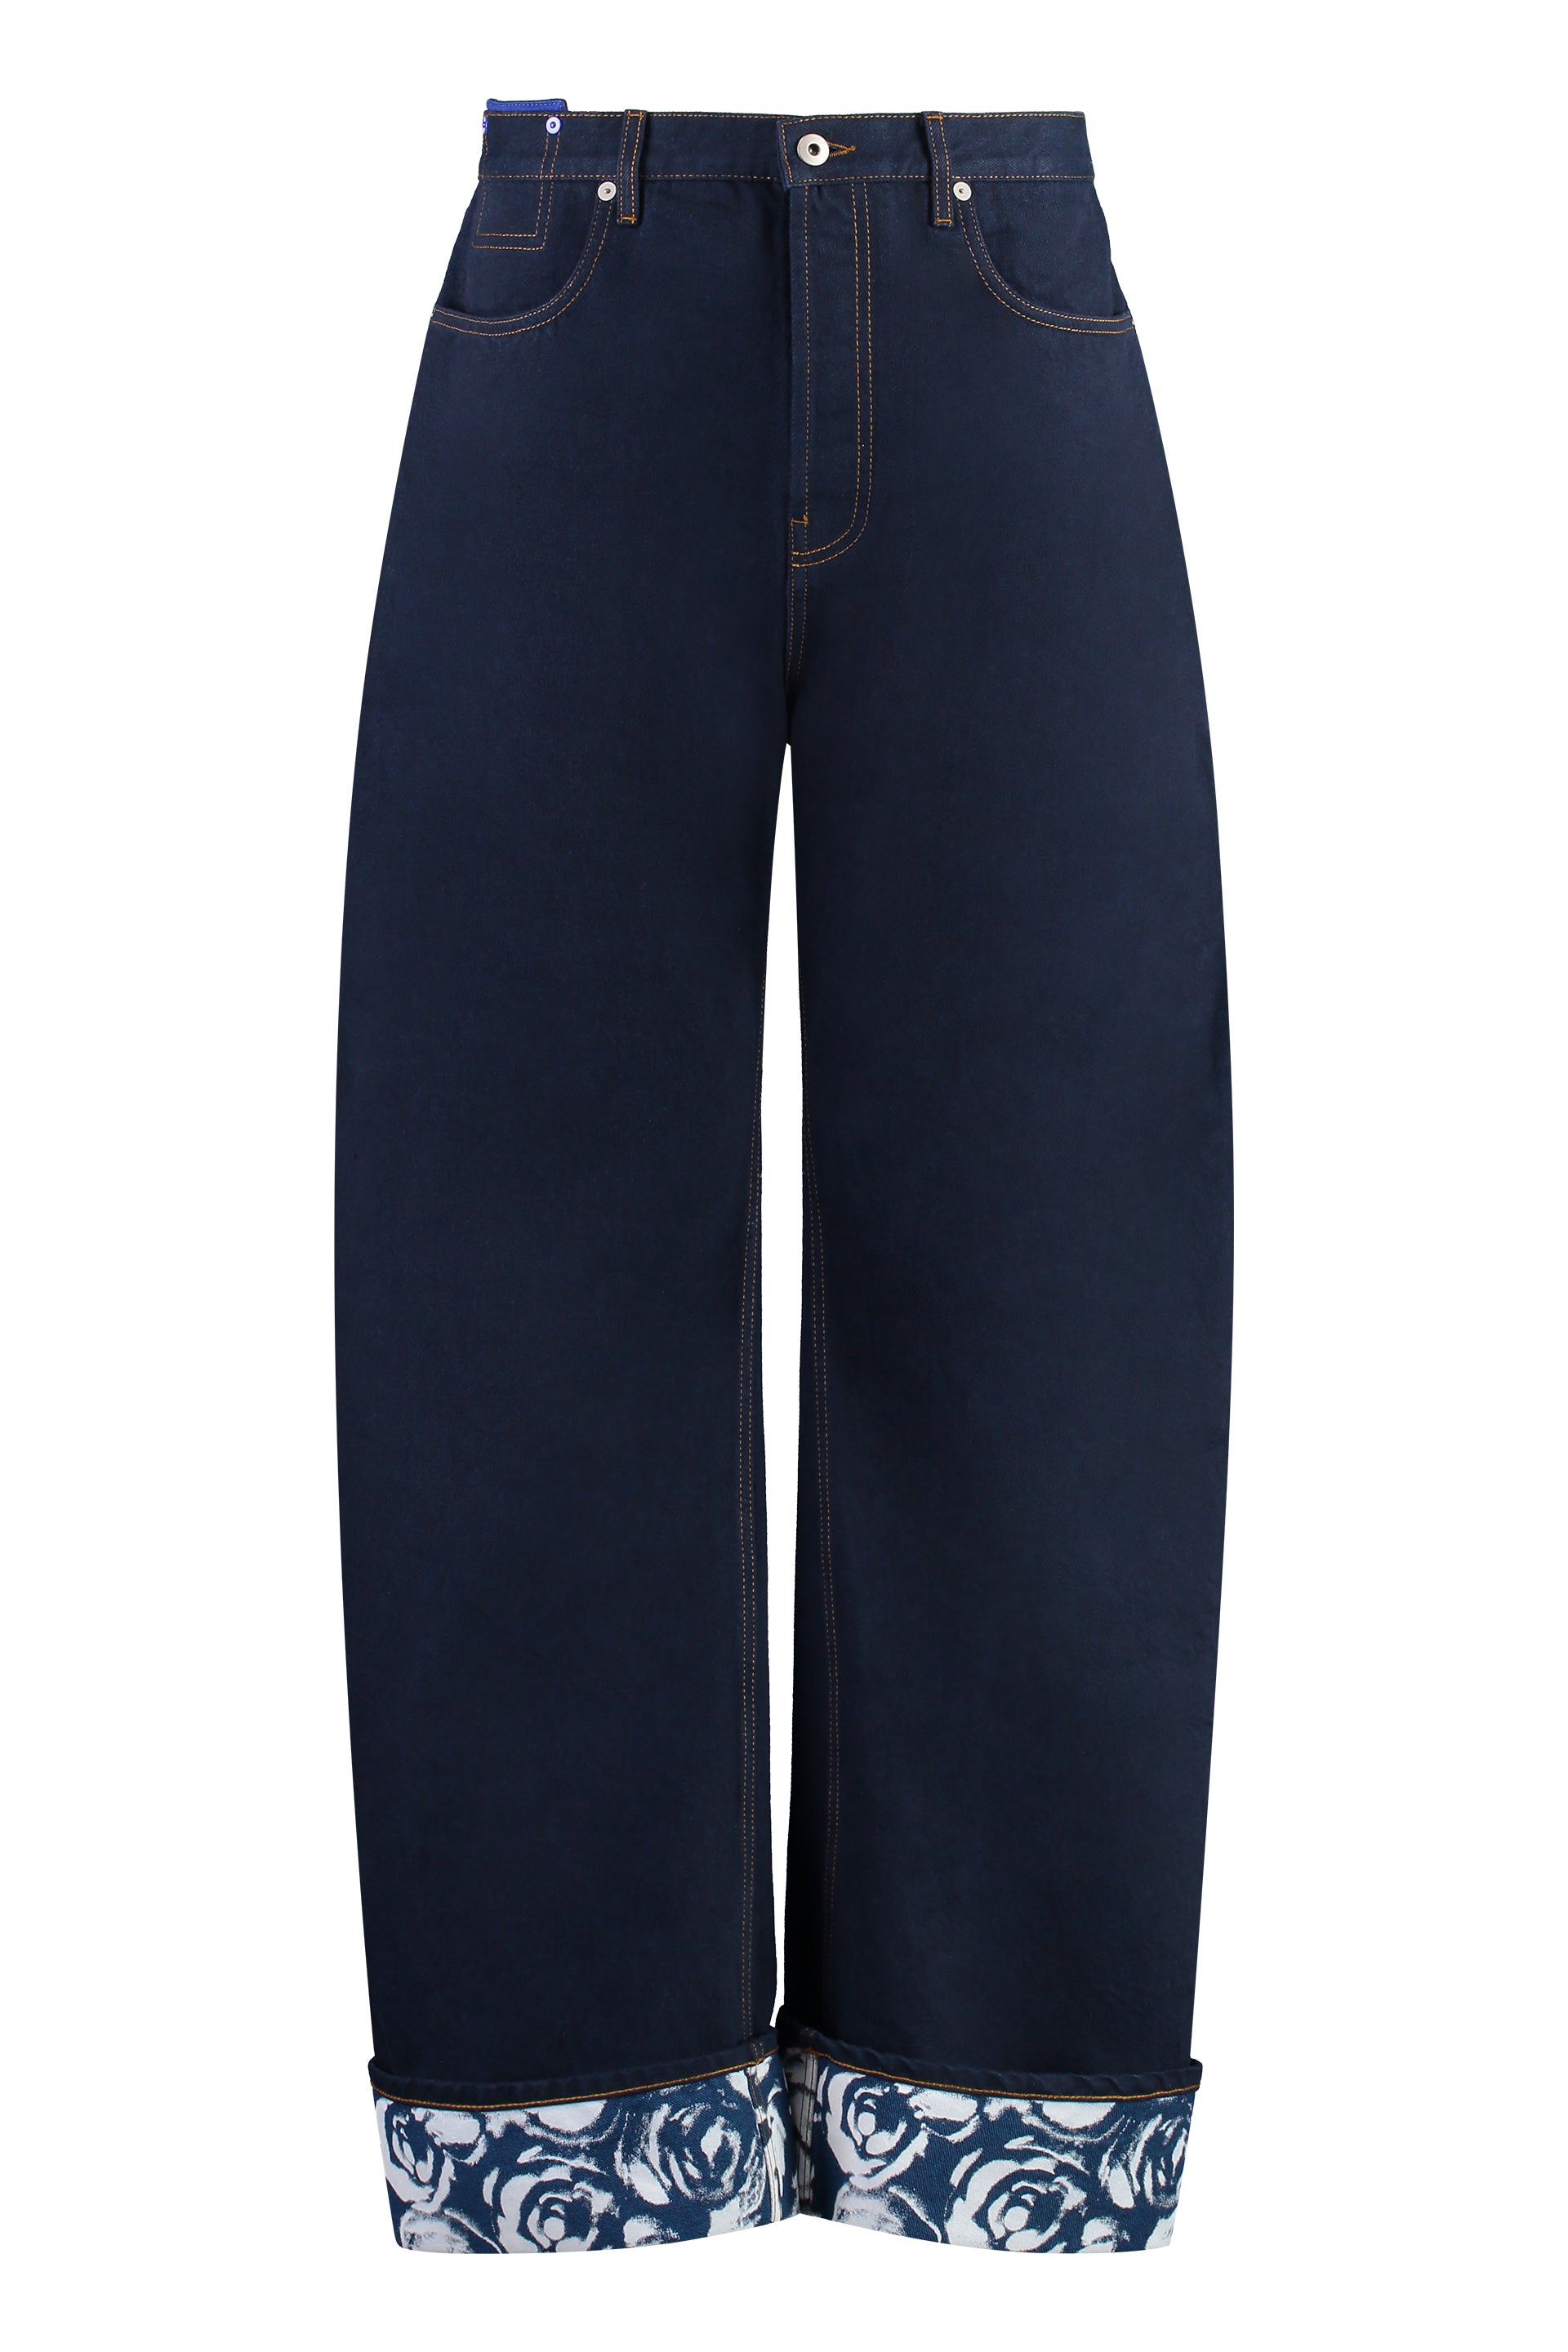 Burberry Men's Wide-leg Blue Jeans With Leather Details